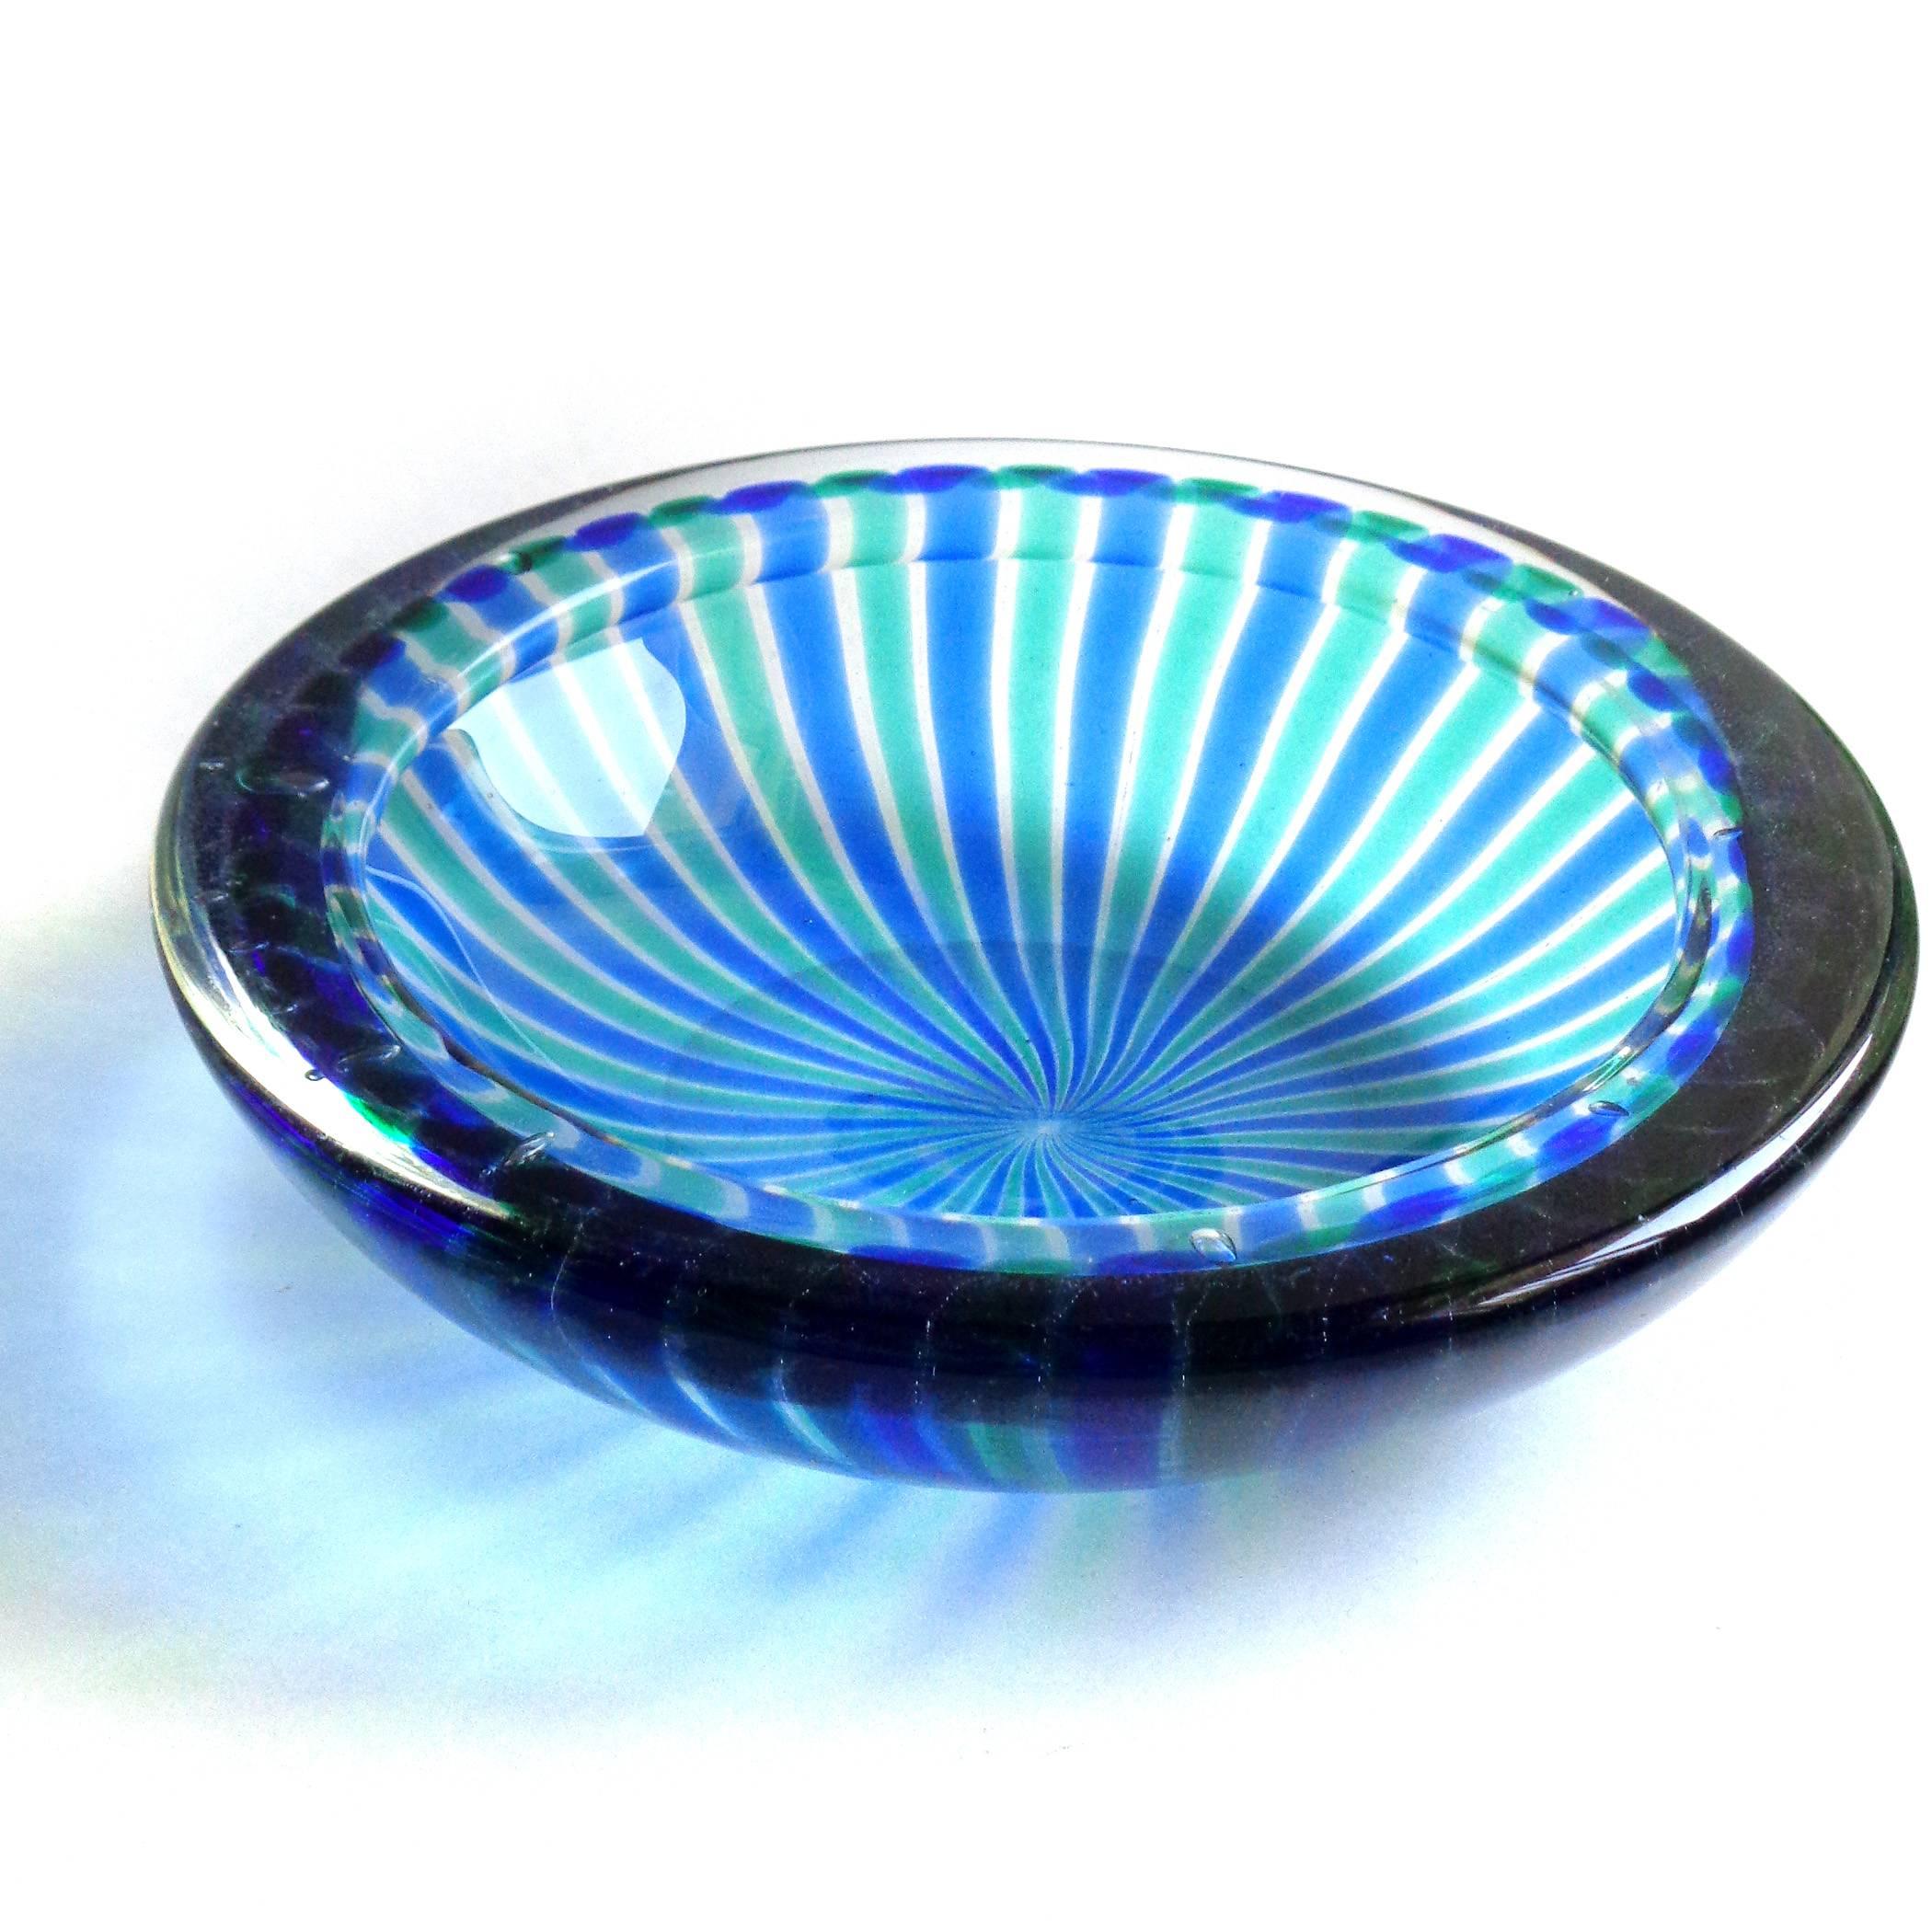 Incredible Murano hand blown cobalt blue and green ribbons art glass bowl.
Attributed to the Fratelli Toso company. The piece has a folded over rim and pinwheel design. A beautiful statement piece for any table!
